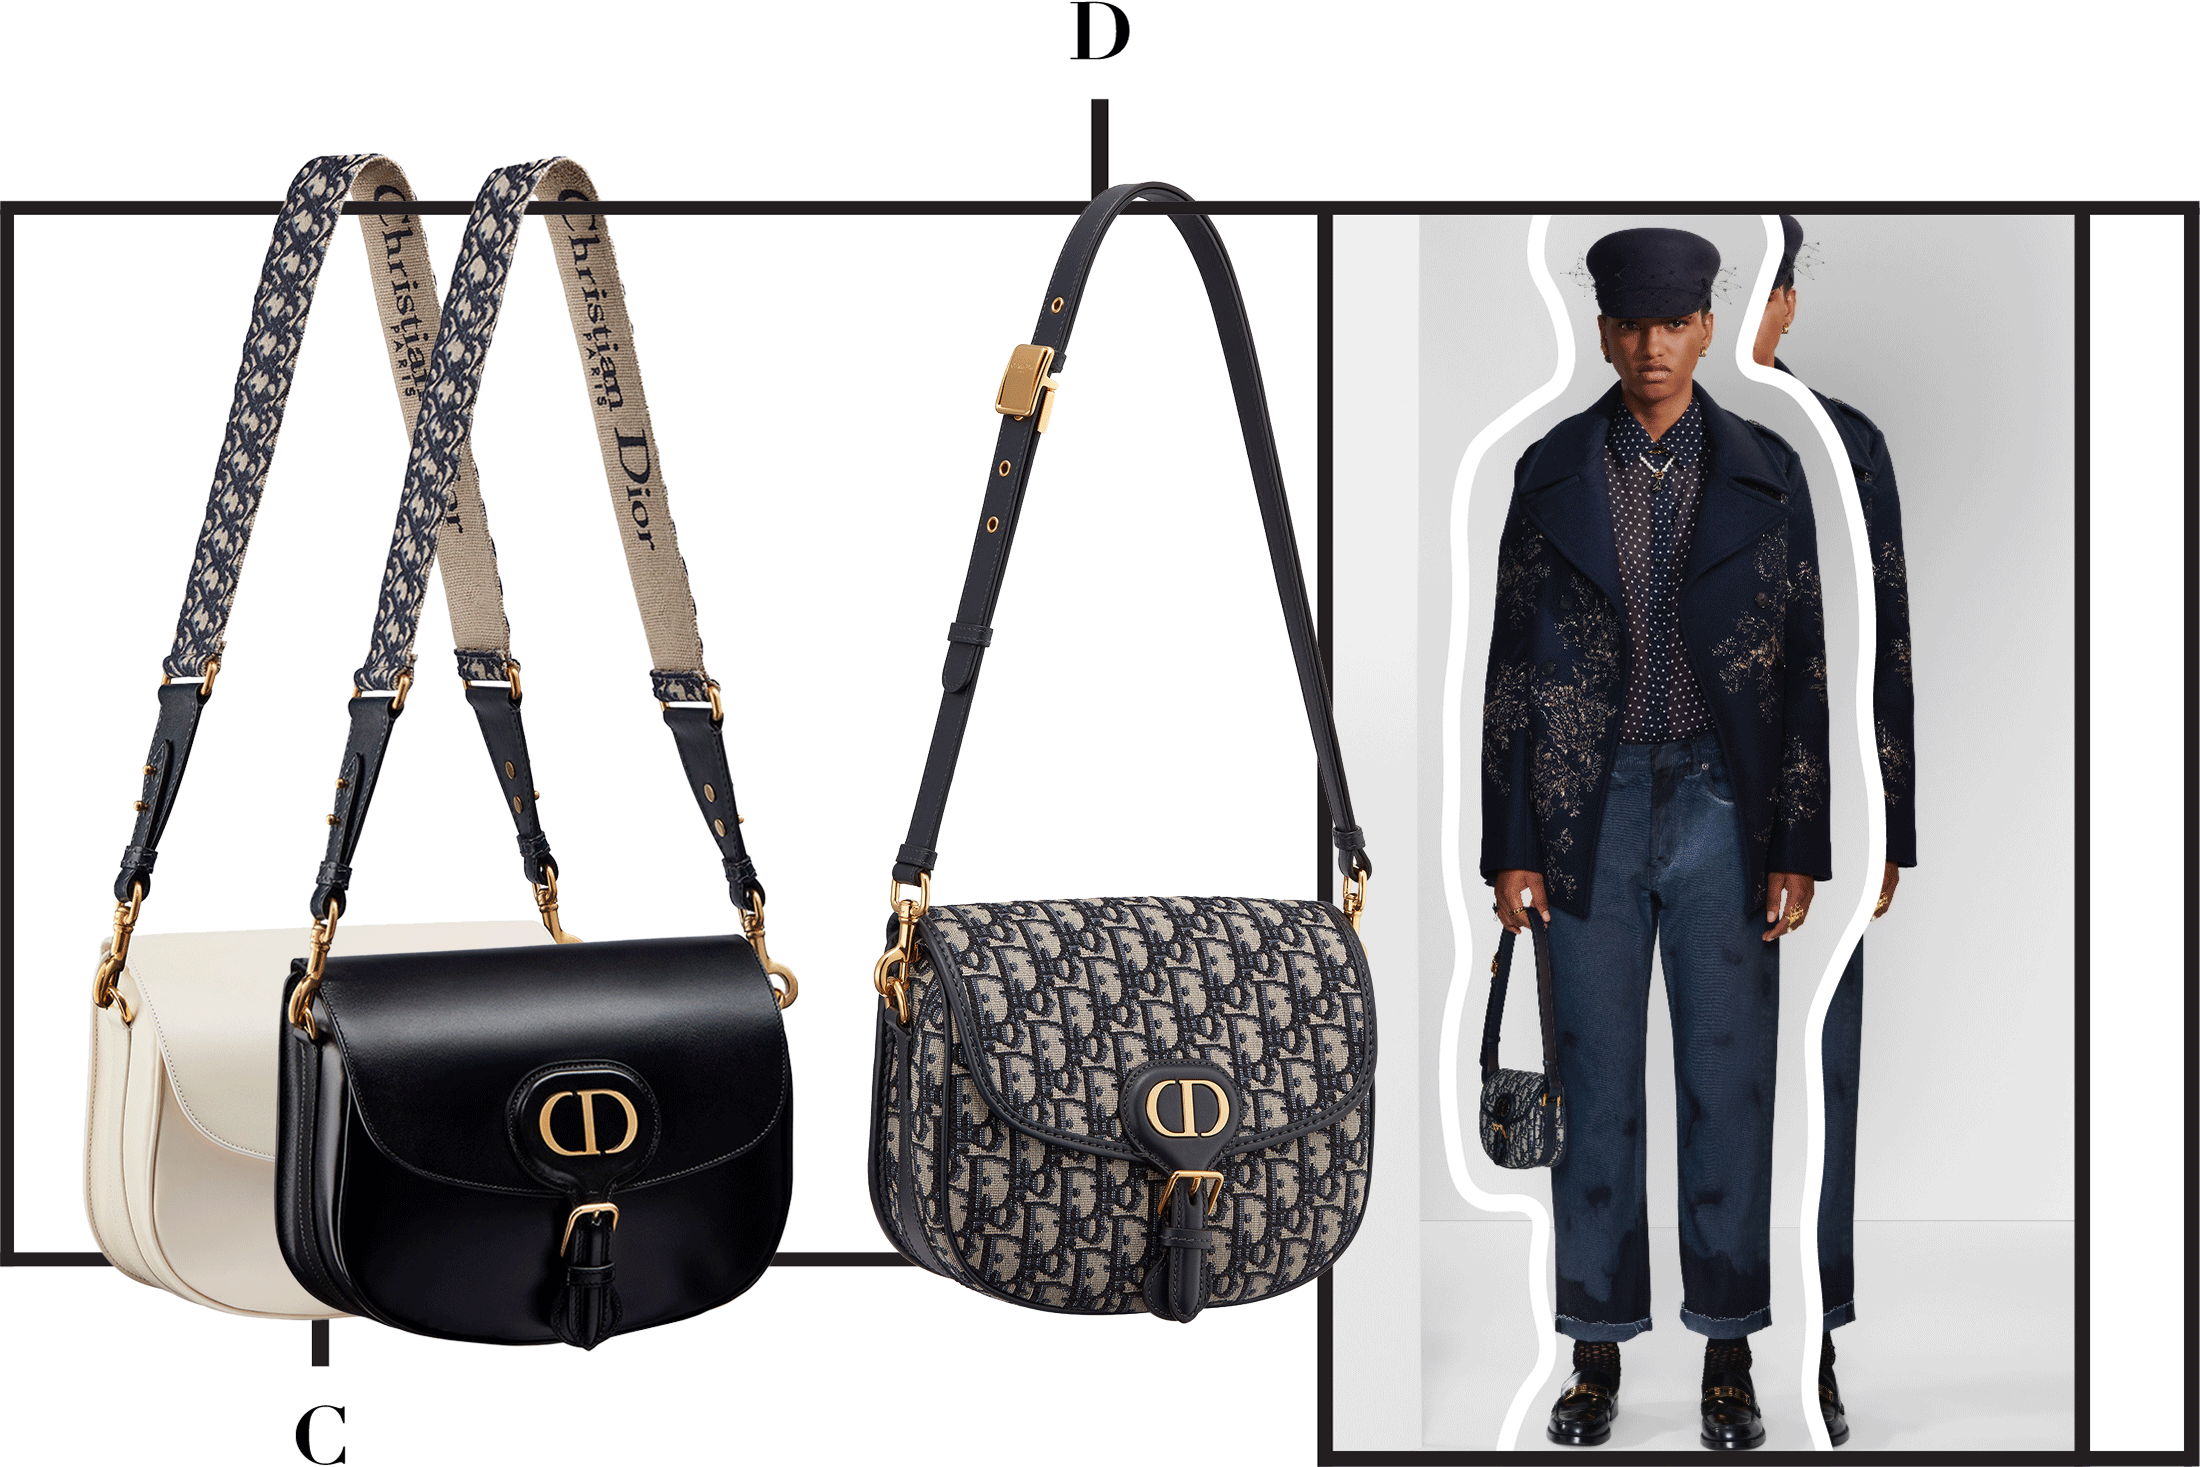 Dior Bobby Bag Comparisons Micro, Small, Medium, Large How It Looks On Me,  What Fits, Which To Buy 